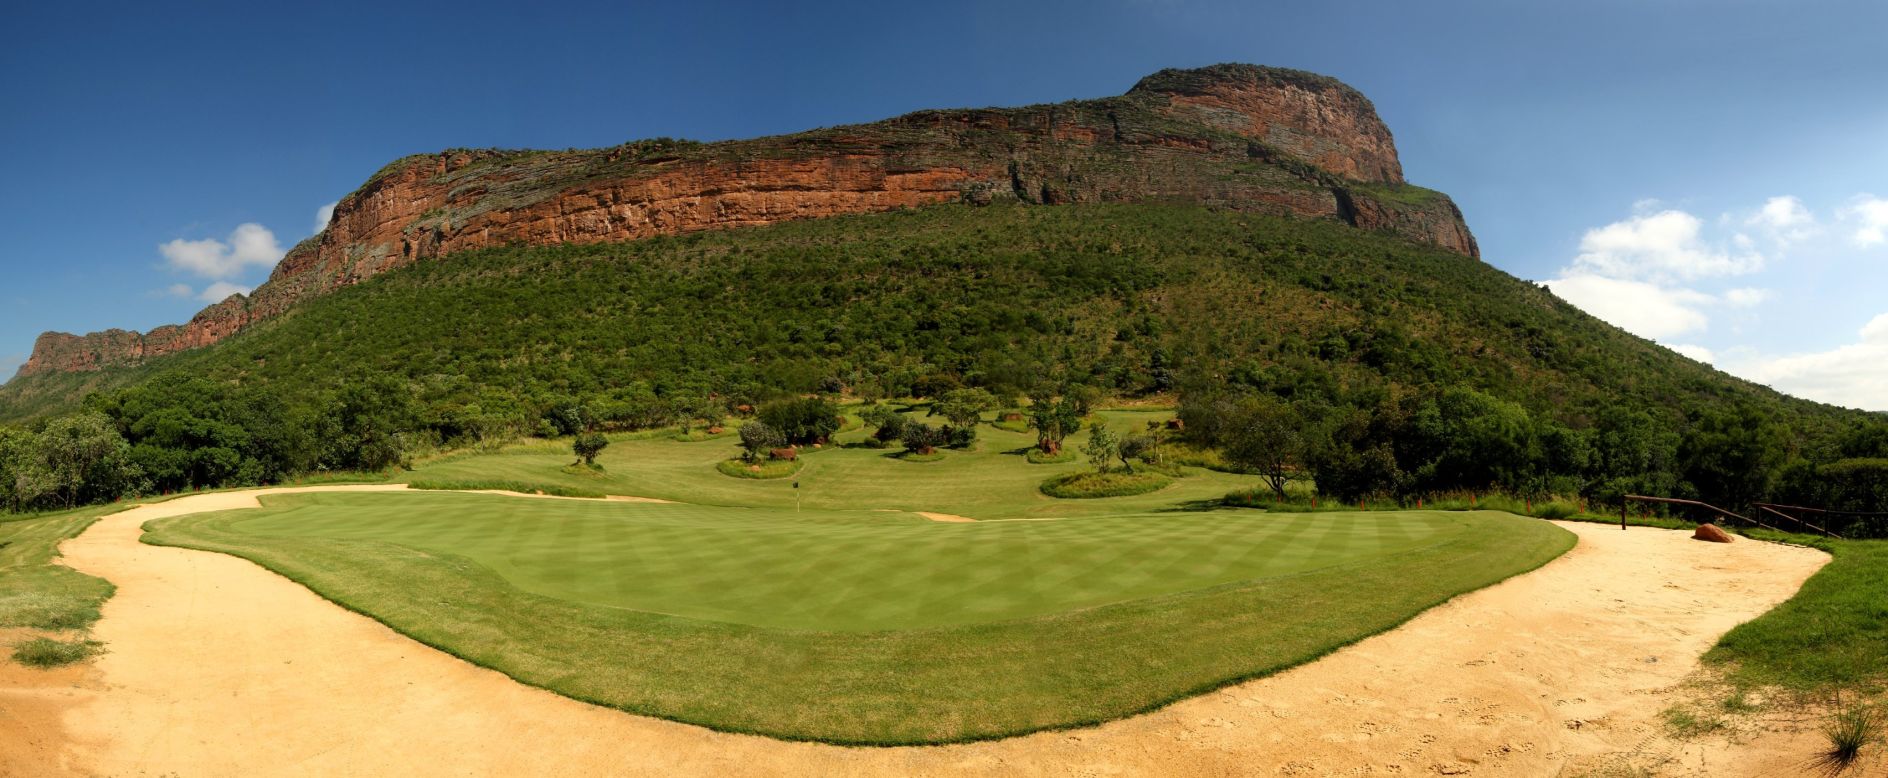 The course is one of the longest in the world. Normally playing at 6,534 meters it can be extended to 7,748m.